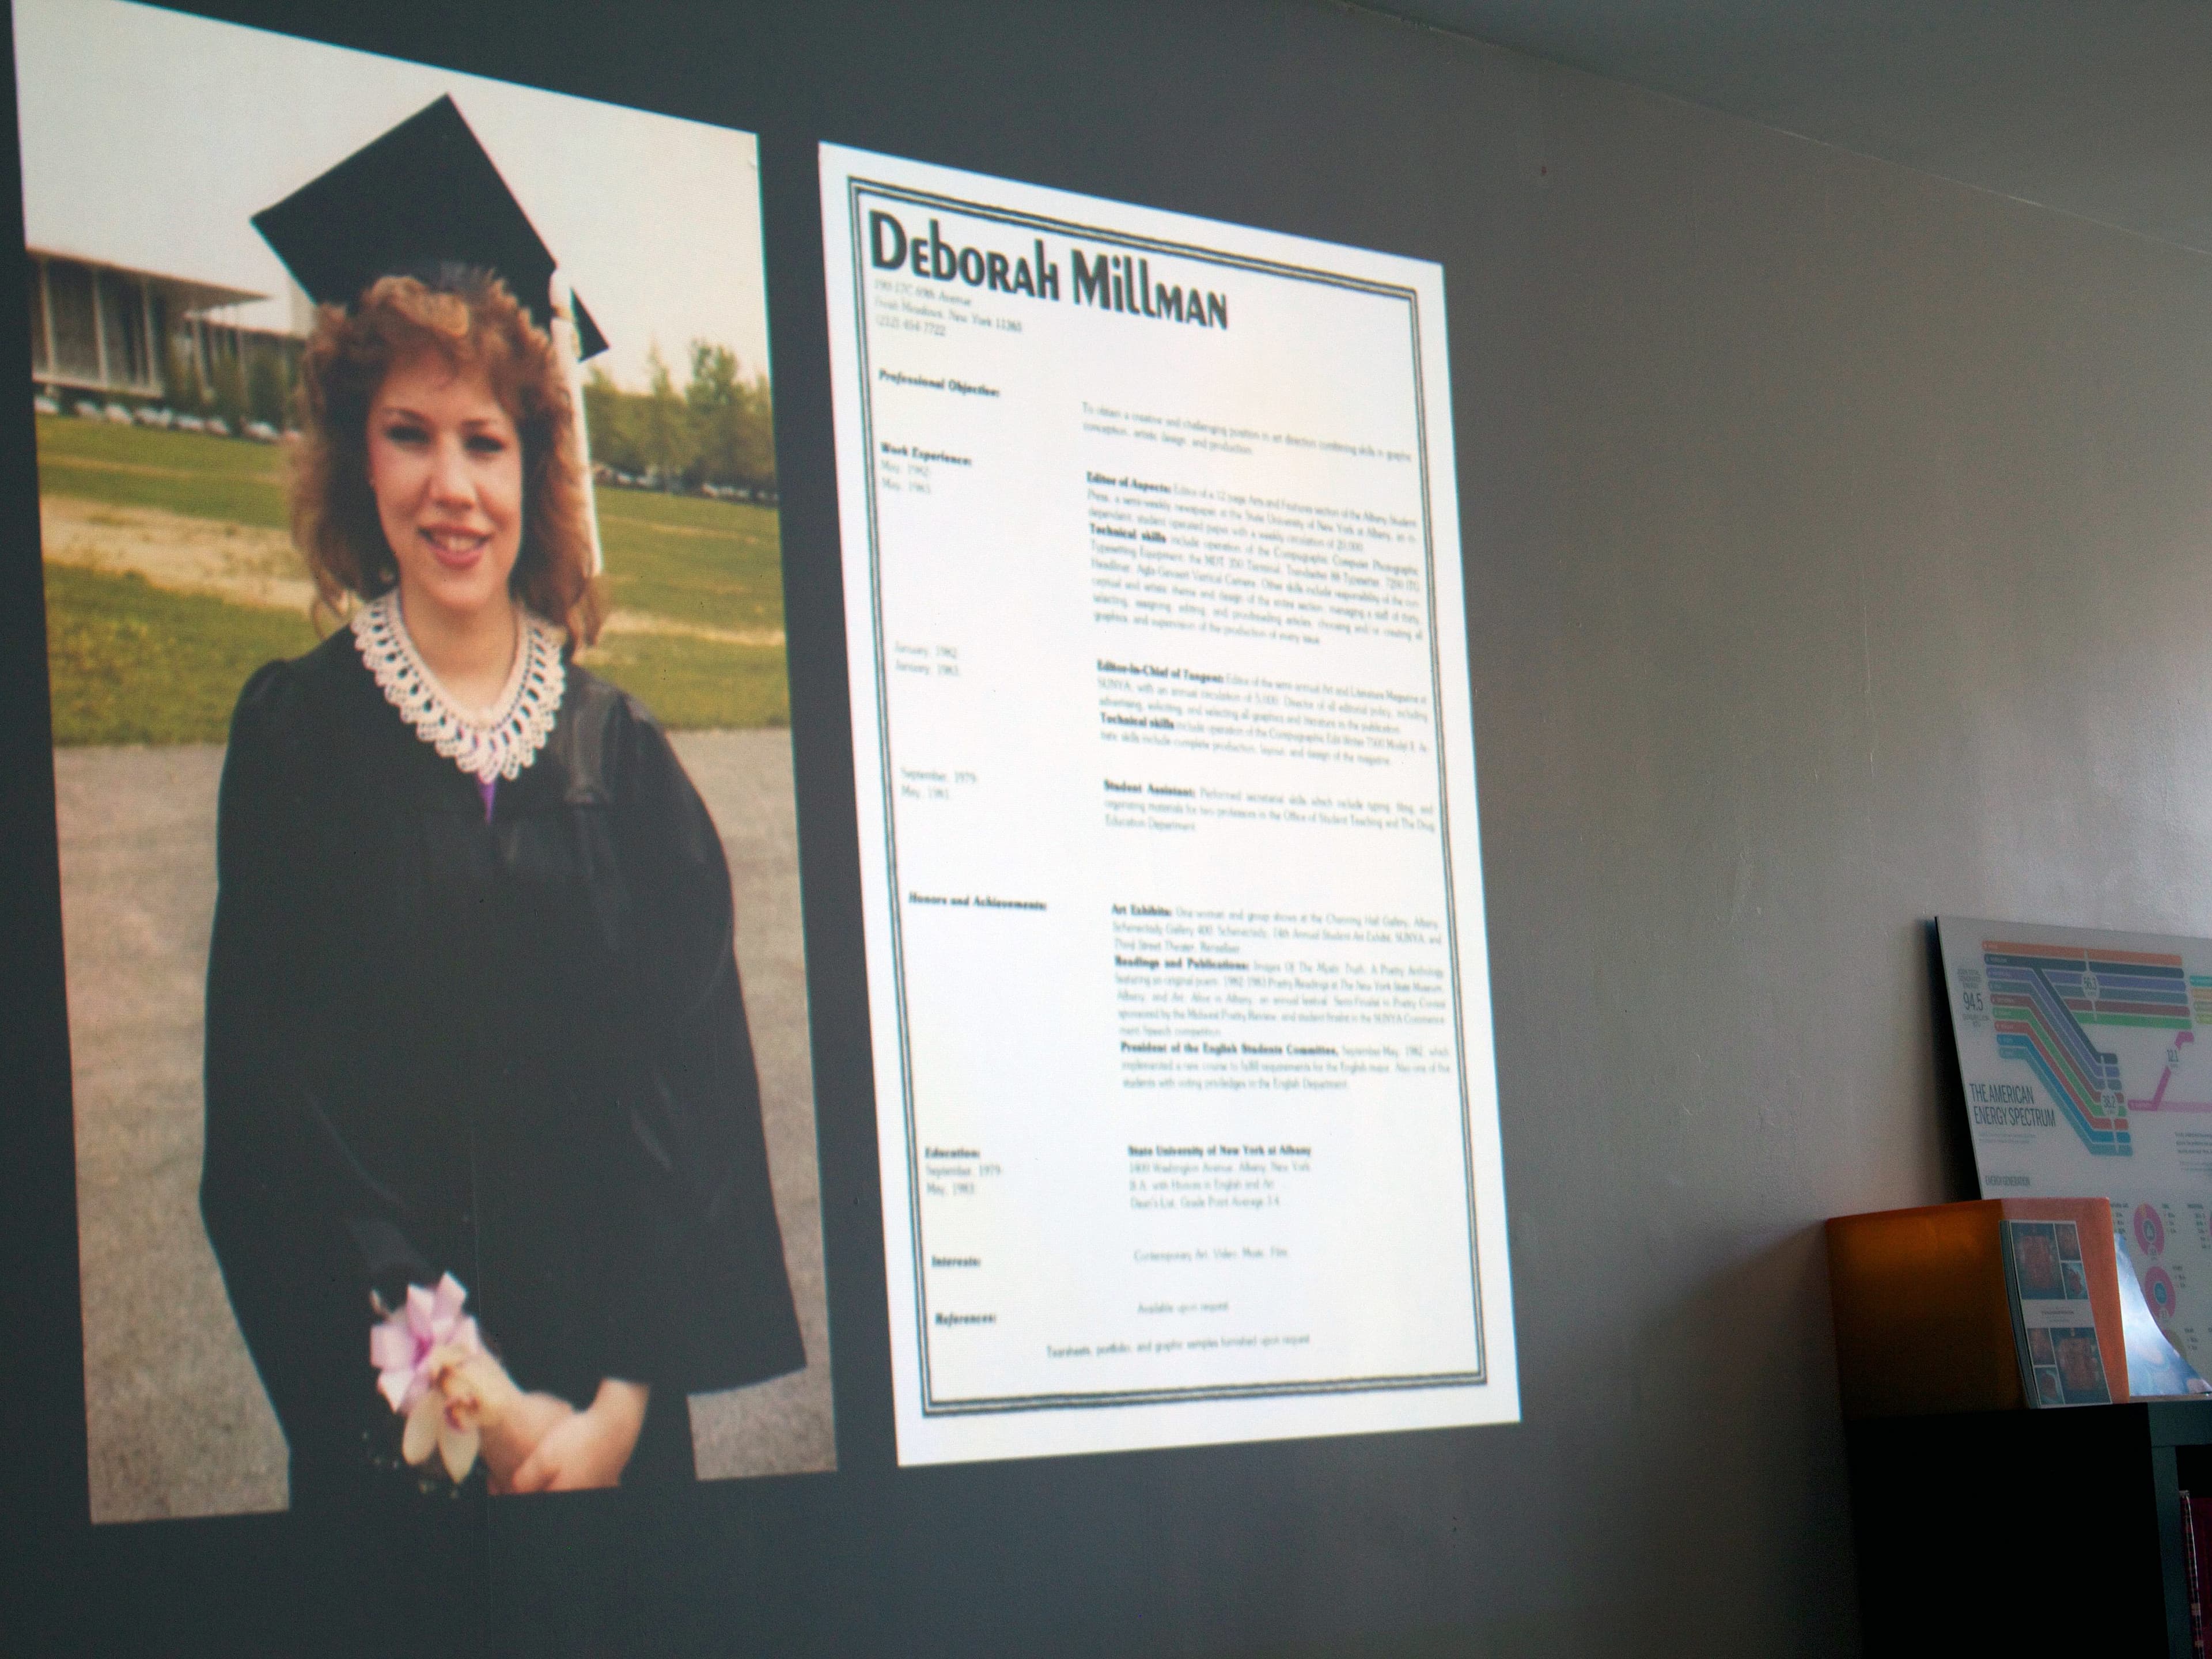 A projection on a wall shows a woman in a graduation cap and gown holding a diploma. Beside her image is a résumé for "Deborah Millman" with details of her education, skills, and experience. In the background is a shelf and a framed piece of artwork.